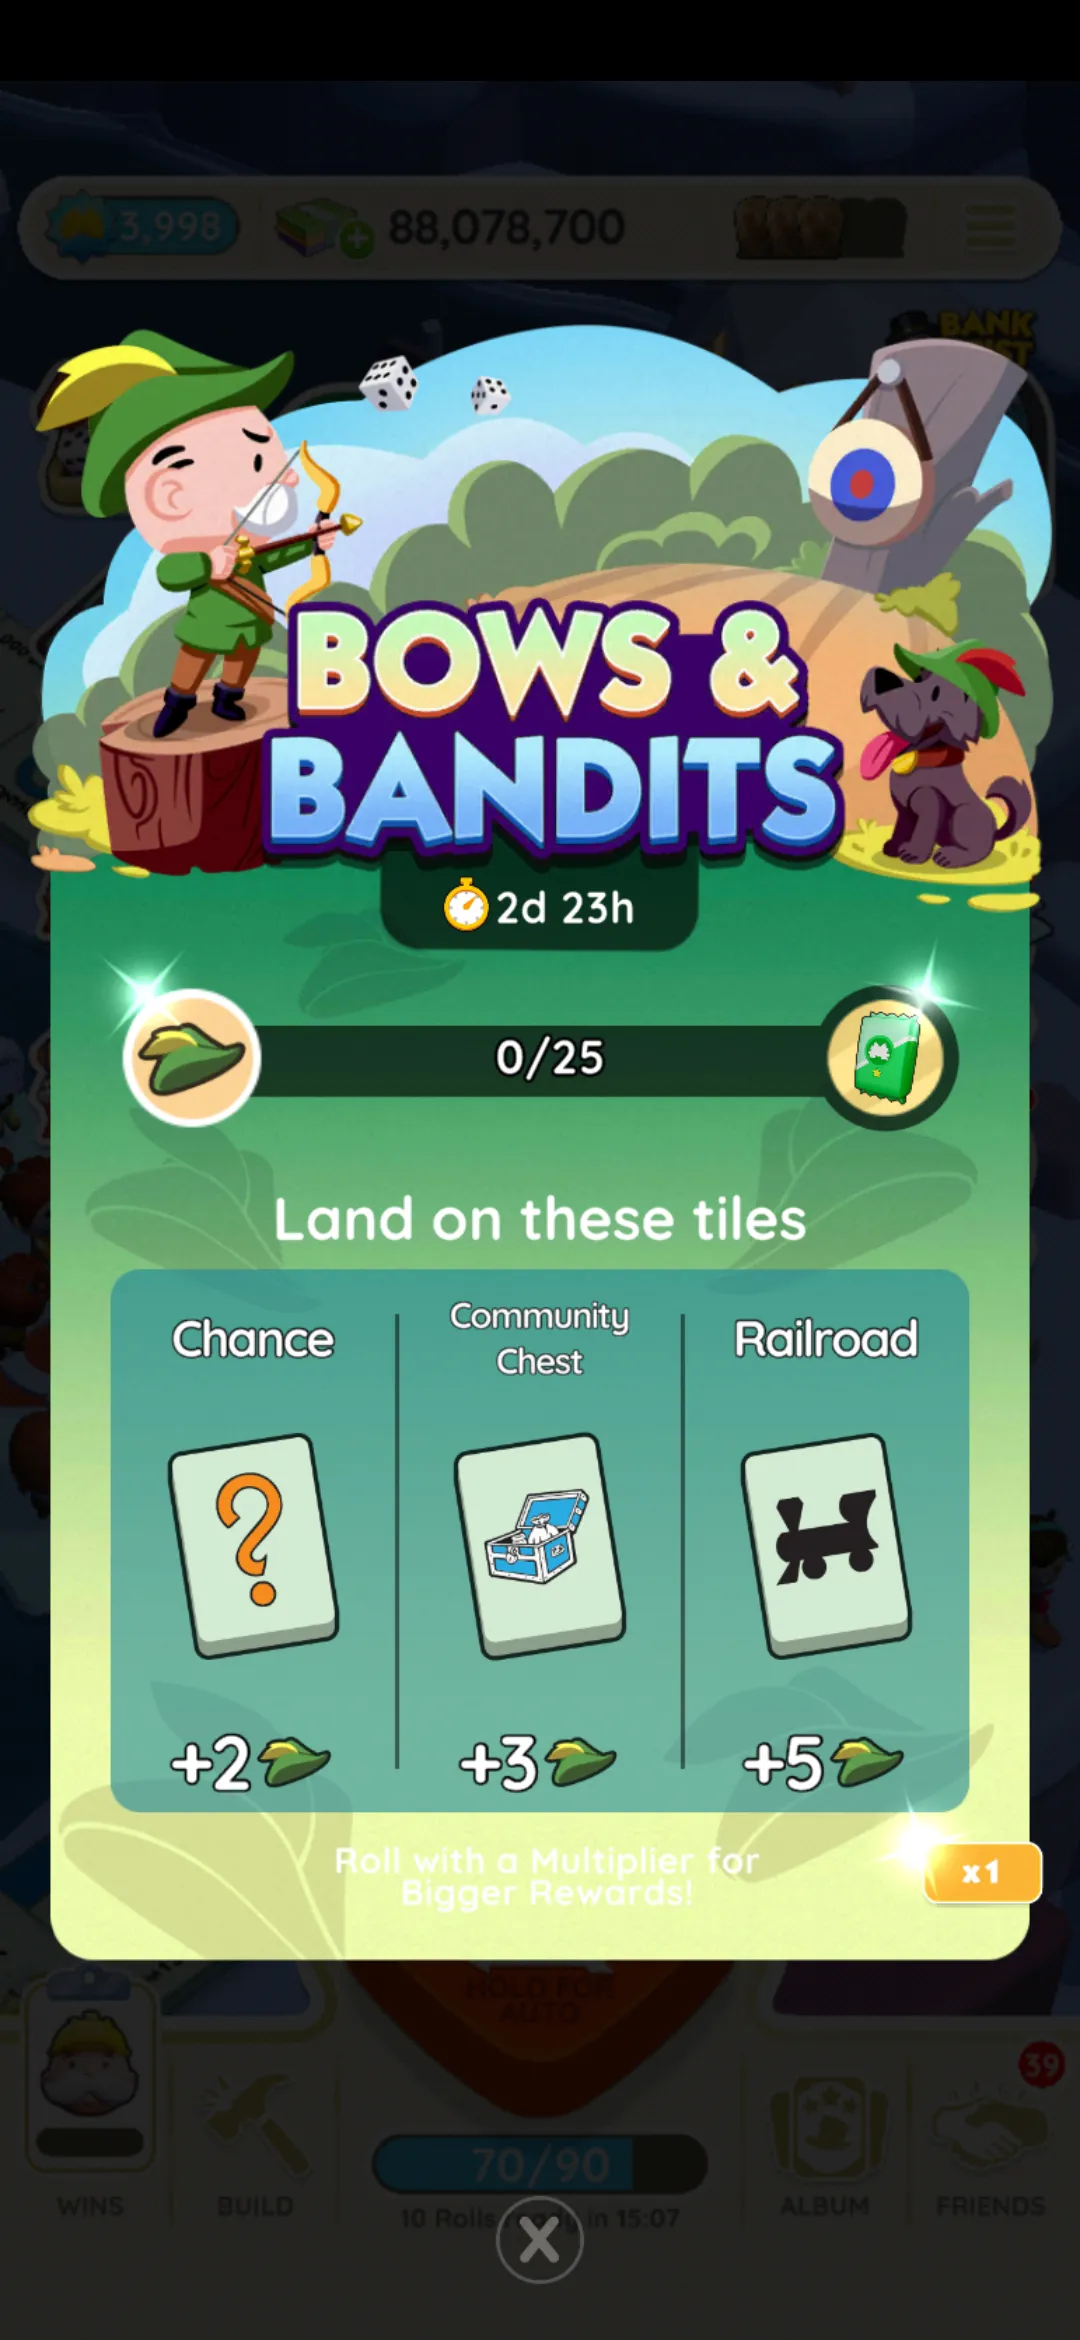 A header-sized image for the Bows & Bandits event in Monopoly GO that shows Rich Uncle Pennybags dressed up like Robin Hood and shooting at a target. The image is part of an article that lists all the rewards, milestones, and prizes you can get during the Bows & Bandits event in Monopoly GO.